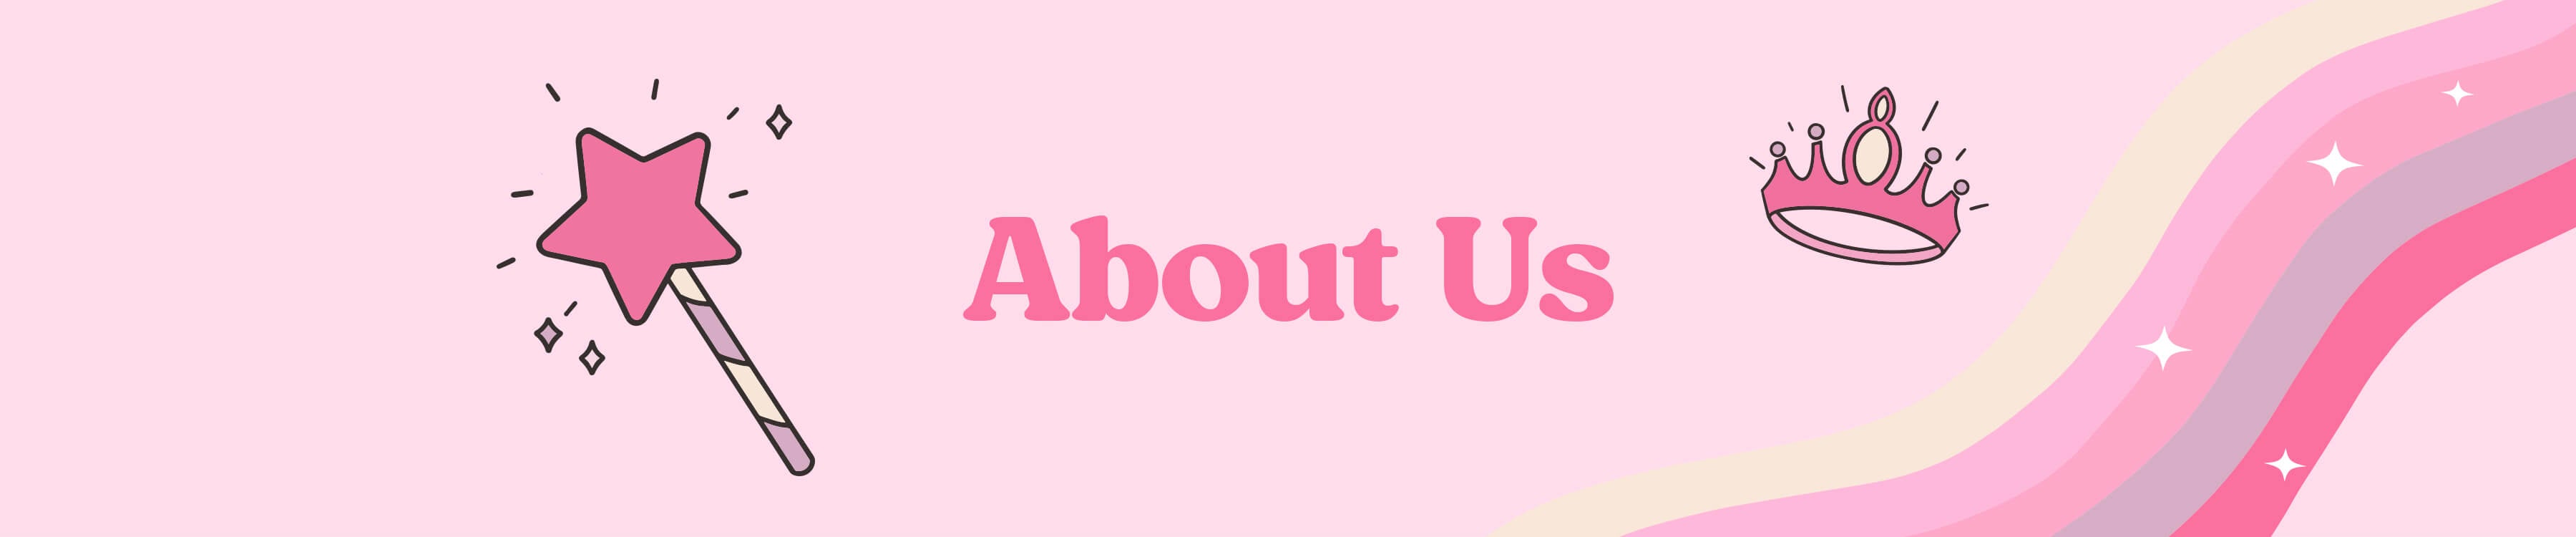 Website banner with About Us text and princess icons